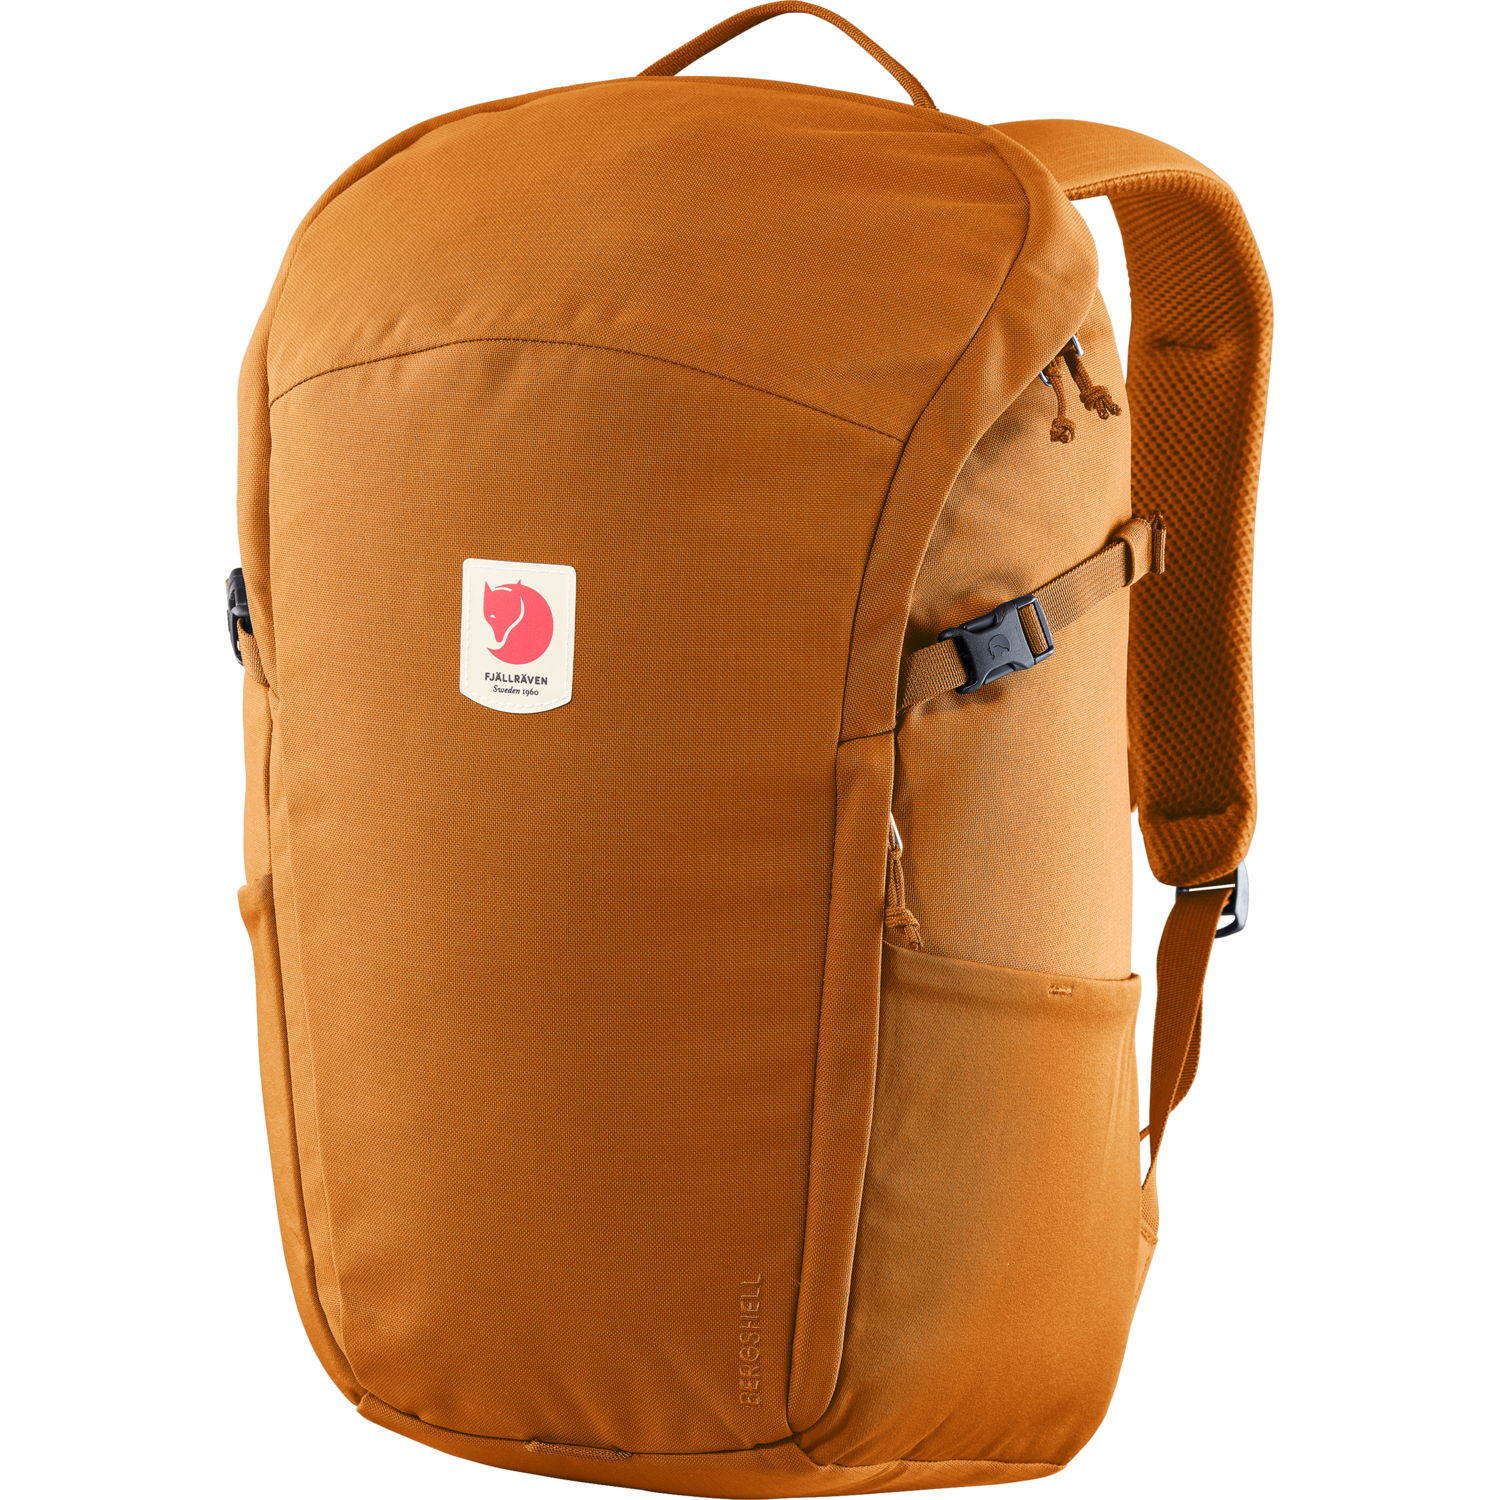 red gold ulvo 23 backpack